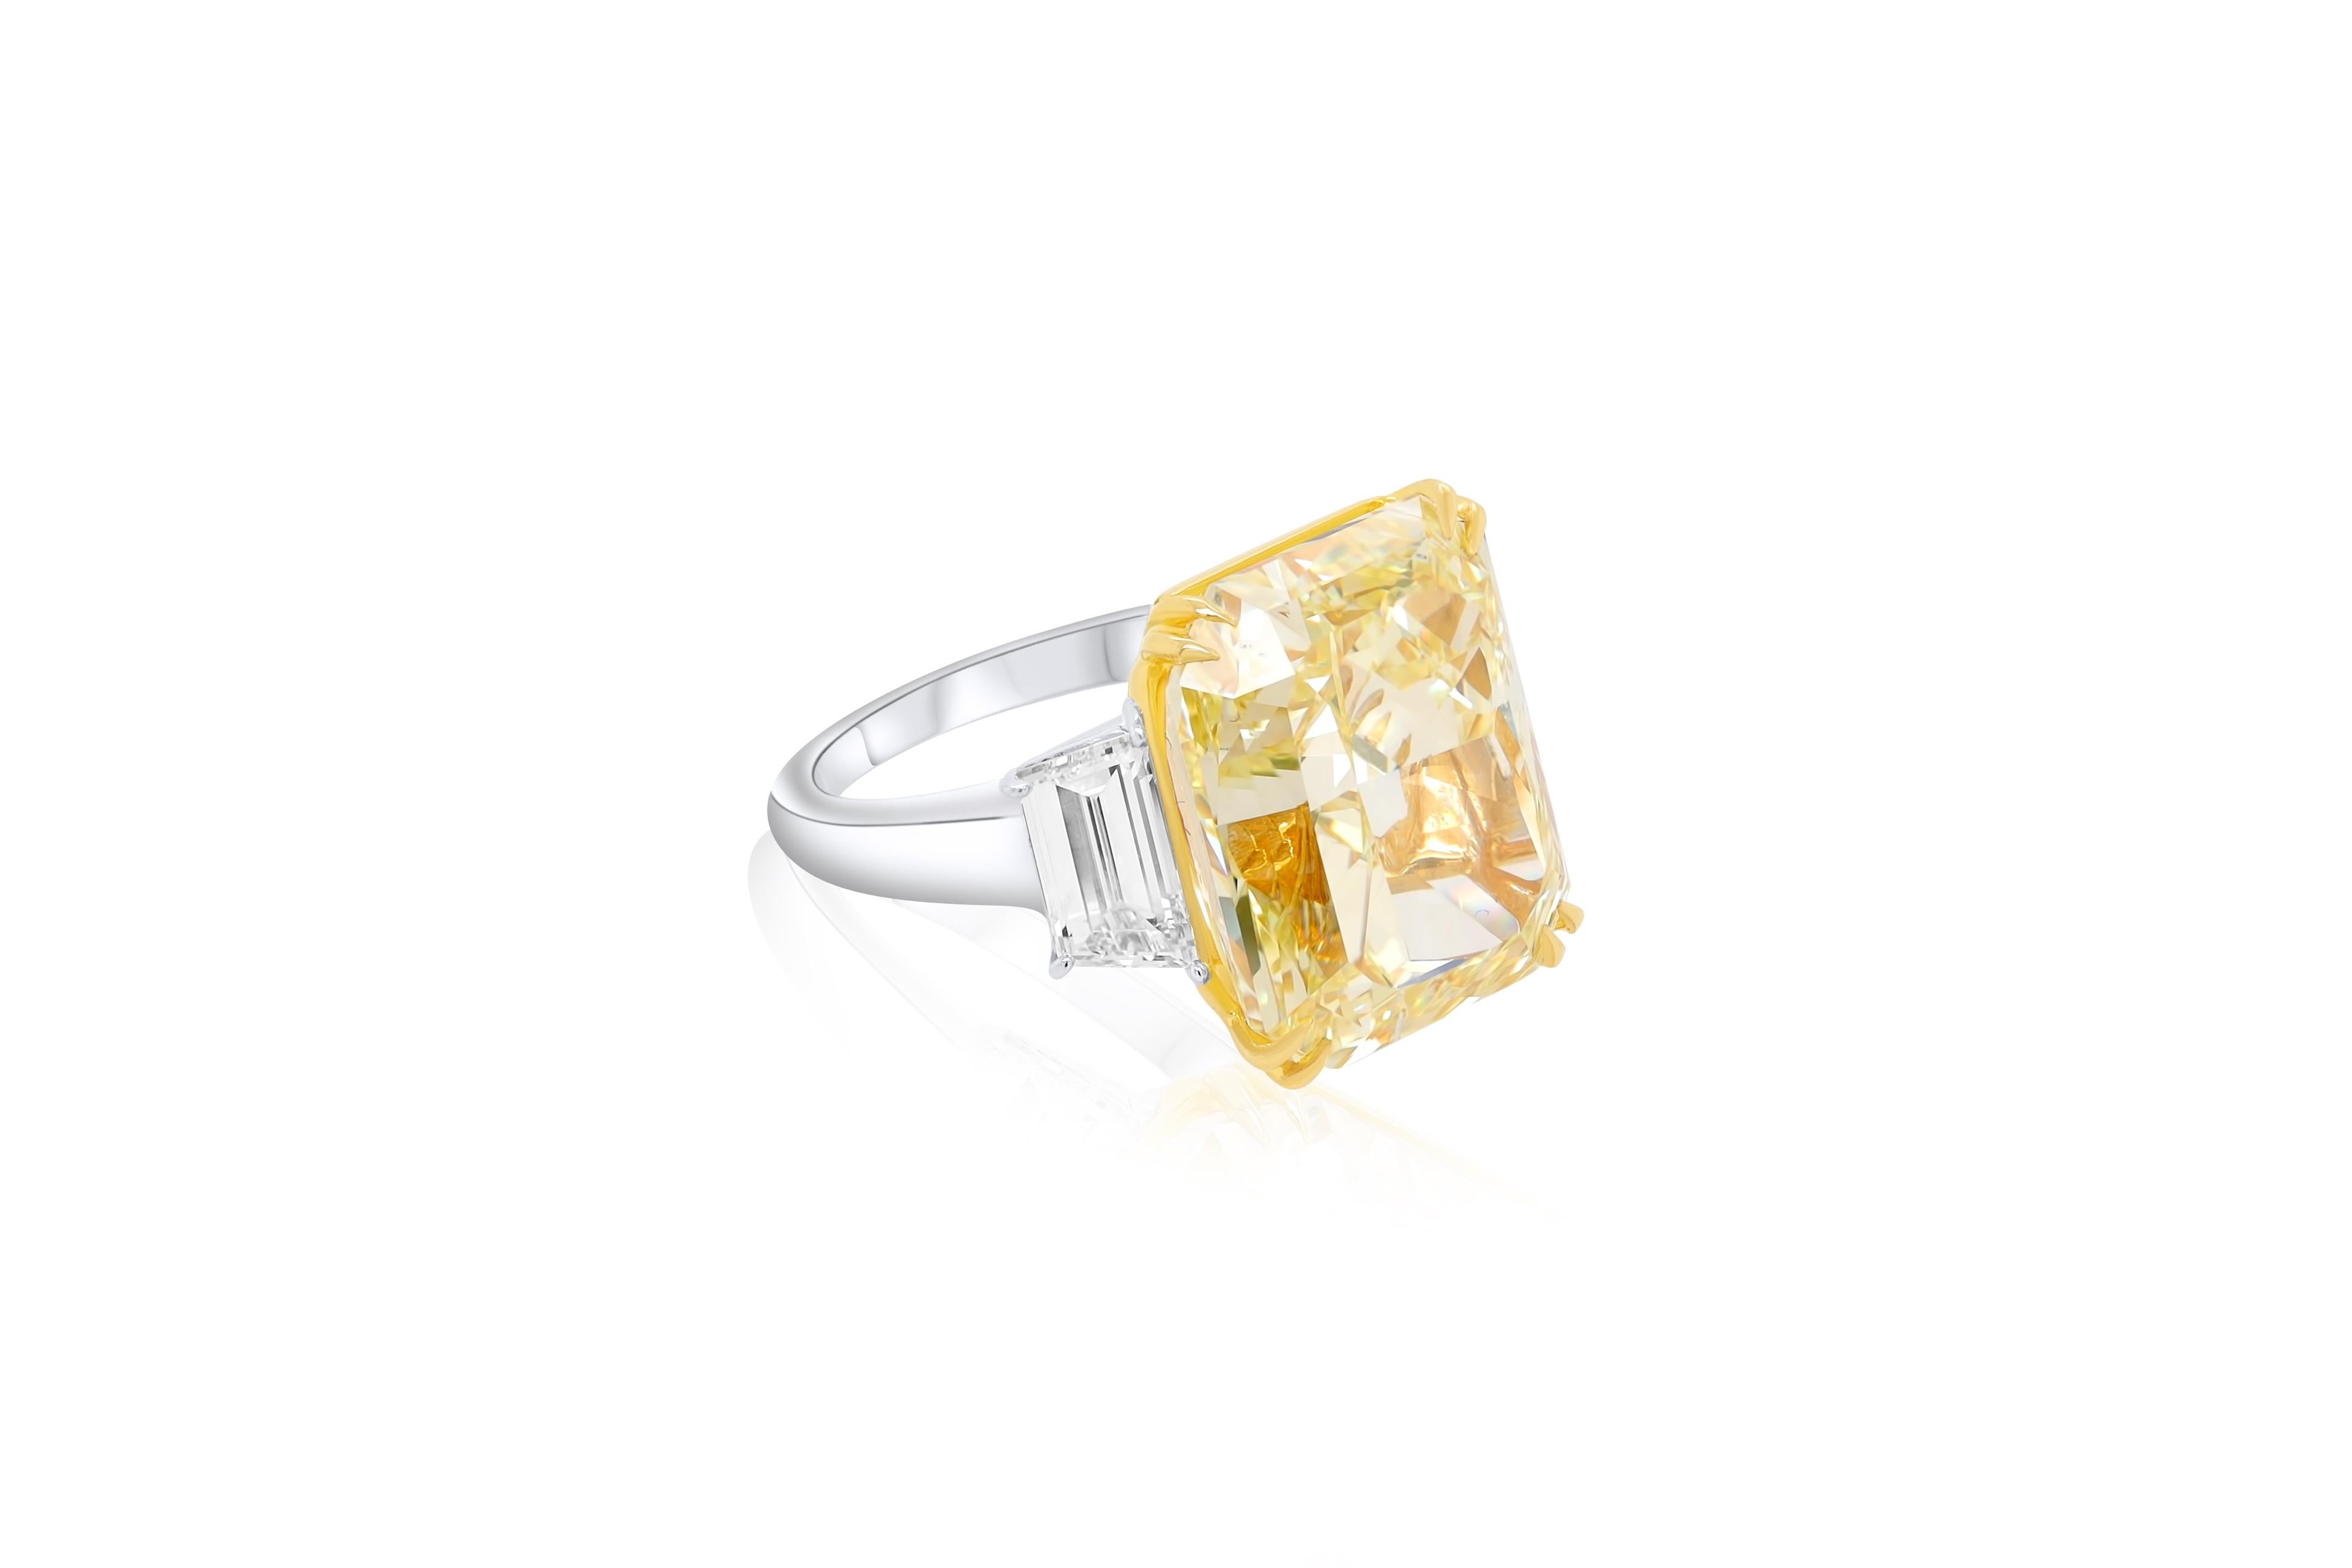 Platinum and 18 kt yellow gold engagement ring featuring a center 20.17 ct GIA certified (FIY VVS1) fancy intense yellow diamond with 2.05 cts tw of trapezoid cut diamonds on the sides (F/VS)
Diana M is one-stop shop for all your jewelry shopping,